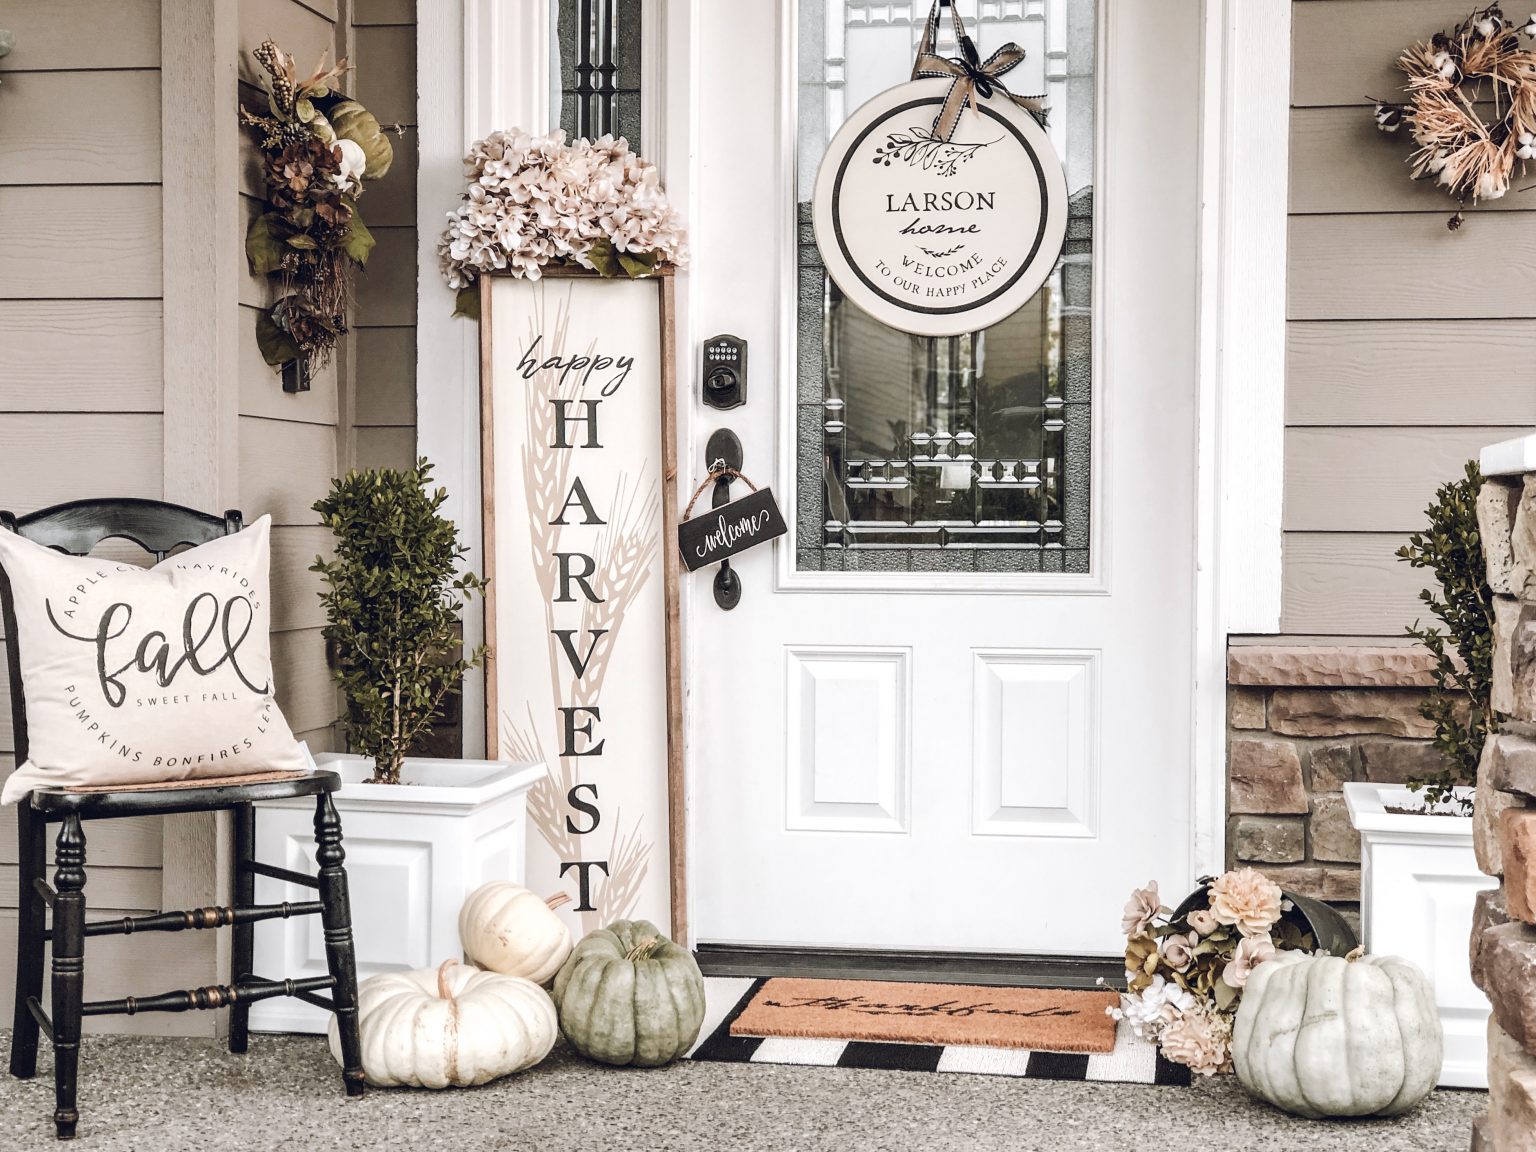 fall front porch inspiration - Re-Fabbed